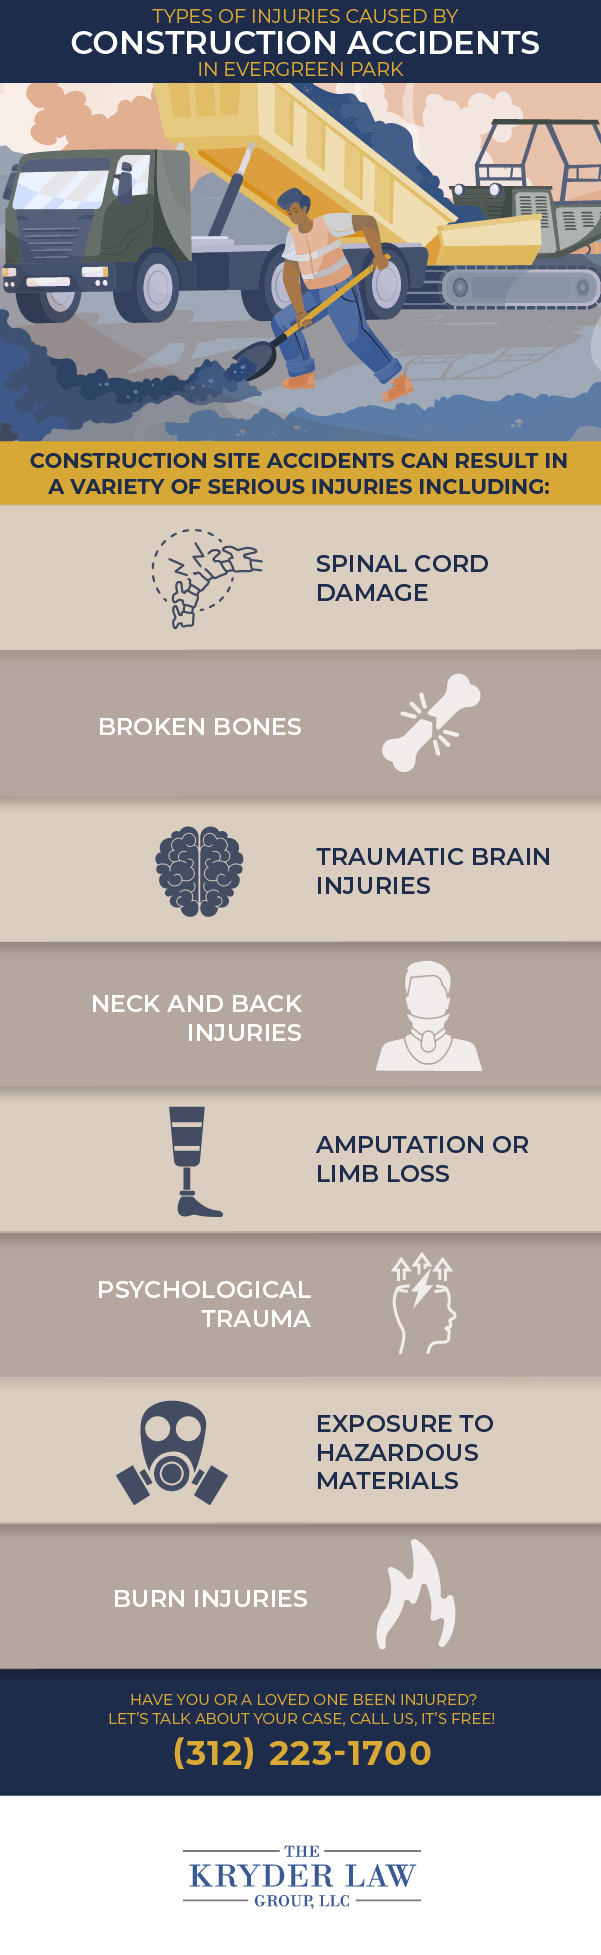 Types of Injuries Caused by Construction Accidents in Evergreen Park